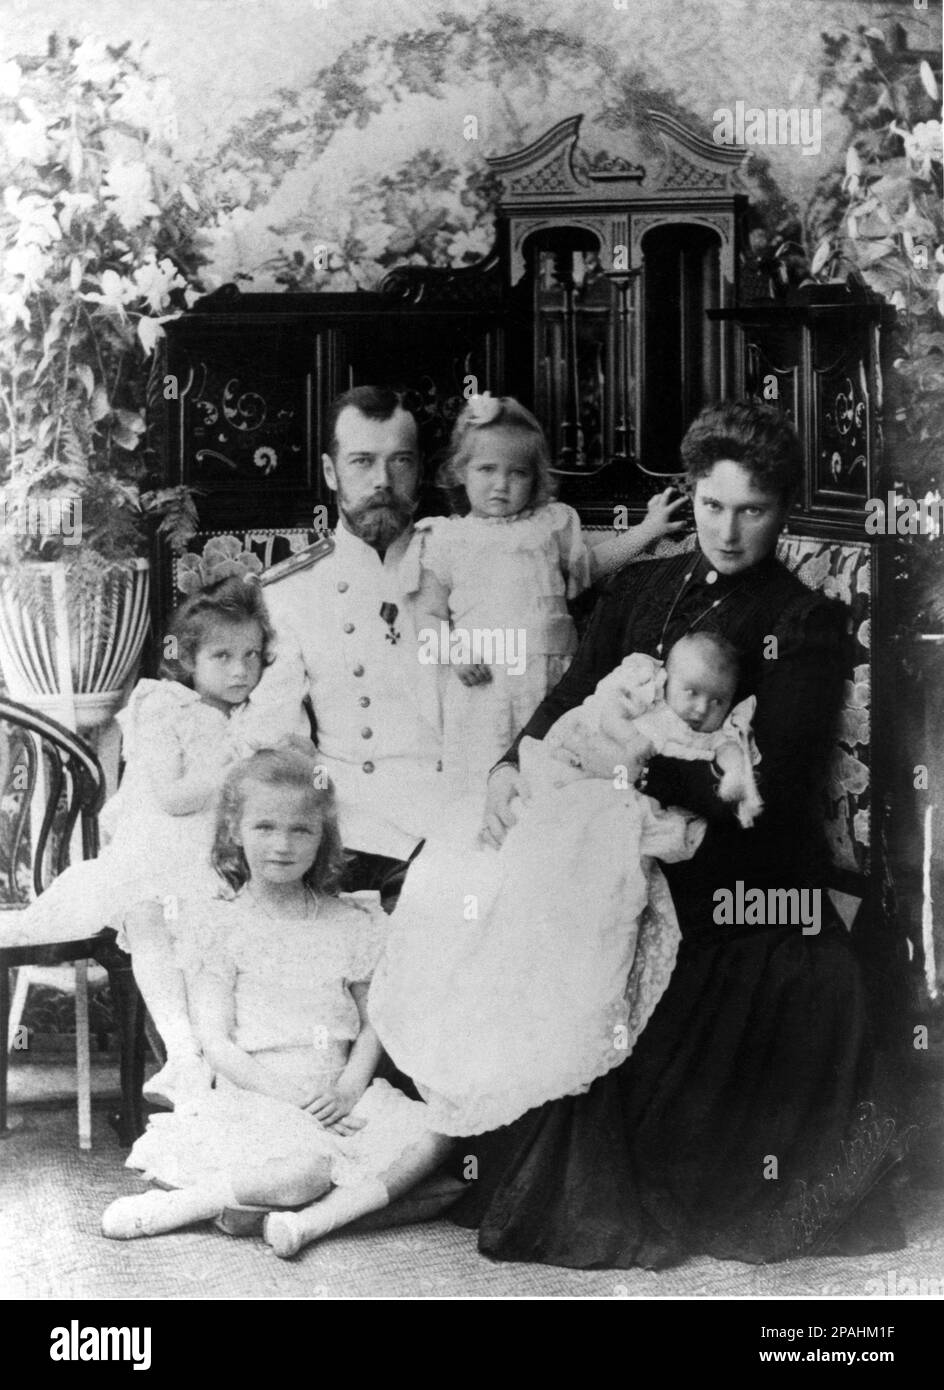 1901 :  The russian Tsar NICHOLAS II of Russia ( 1868– 1918)  with wife Empress Tsarina ALEXANDRA FYODOROVNA ( Feodorovna , Alix of Hesse and by Rhine 1872 - dead the day  17 July 1918 with all the royal family ). In this photo with daughters :  MARIE ( Maria , born 1899 ), TATIANA ( born 1897 ), ANASTASIA ( born 1901 )in the hands of Tsarina and OLGA (born  1895 )- HISTORY  foto storiche - foto storica   - portrait - ritratto - nobilta'  - nobility - nobili  - nobile - BELLE EPOQUE  - RUSSIA - ZAR - Czar - Tsarine -   TZARINA - ZARINA  - RUSSIA - ROMANOFF - ROMANOV - pizzo - lace - jewellery Stock Photo